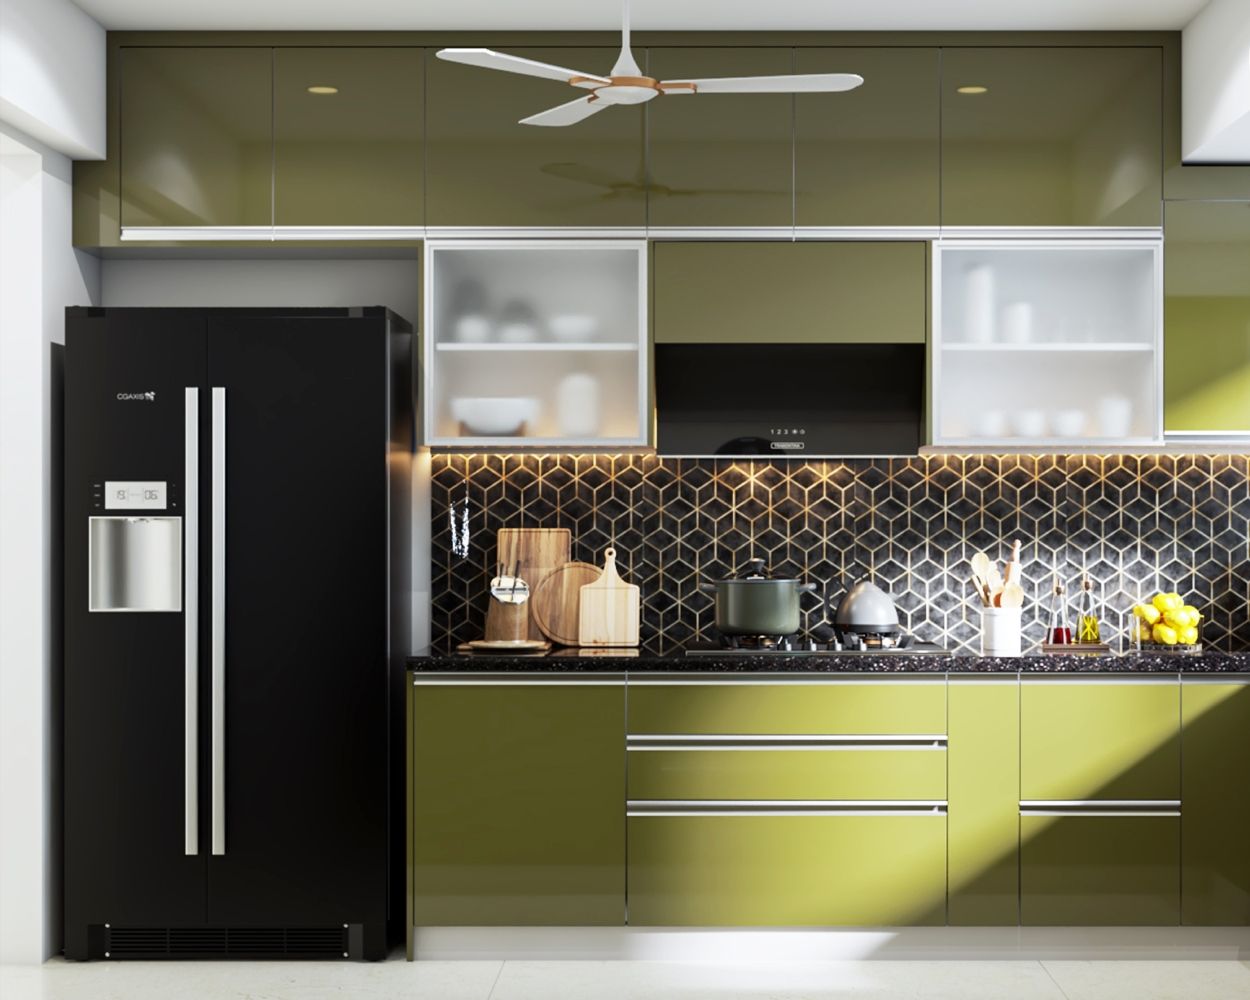 Contemporary U-Shaped Kitchen Cabinet Design With Green Base And Loft Units